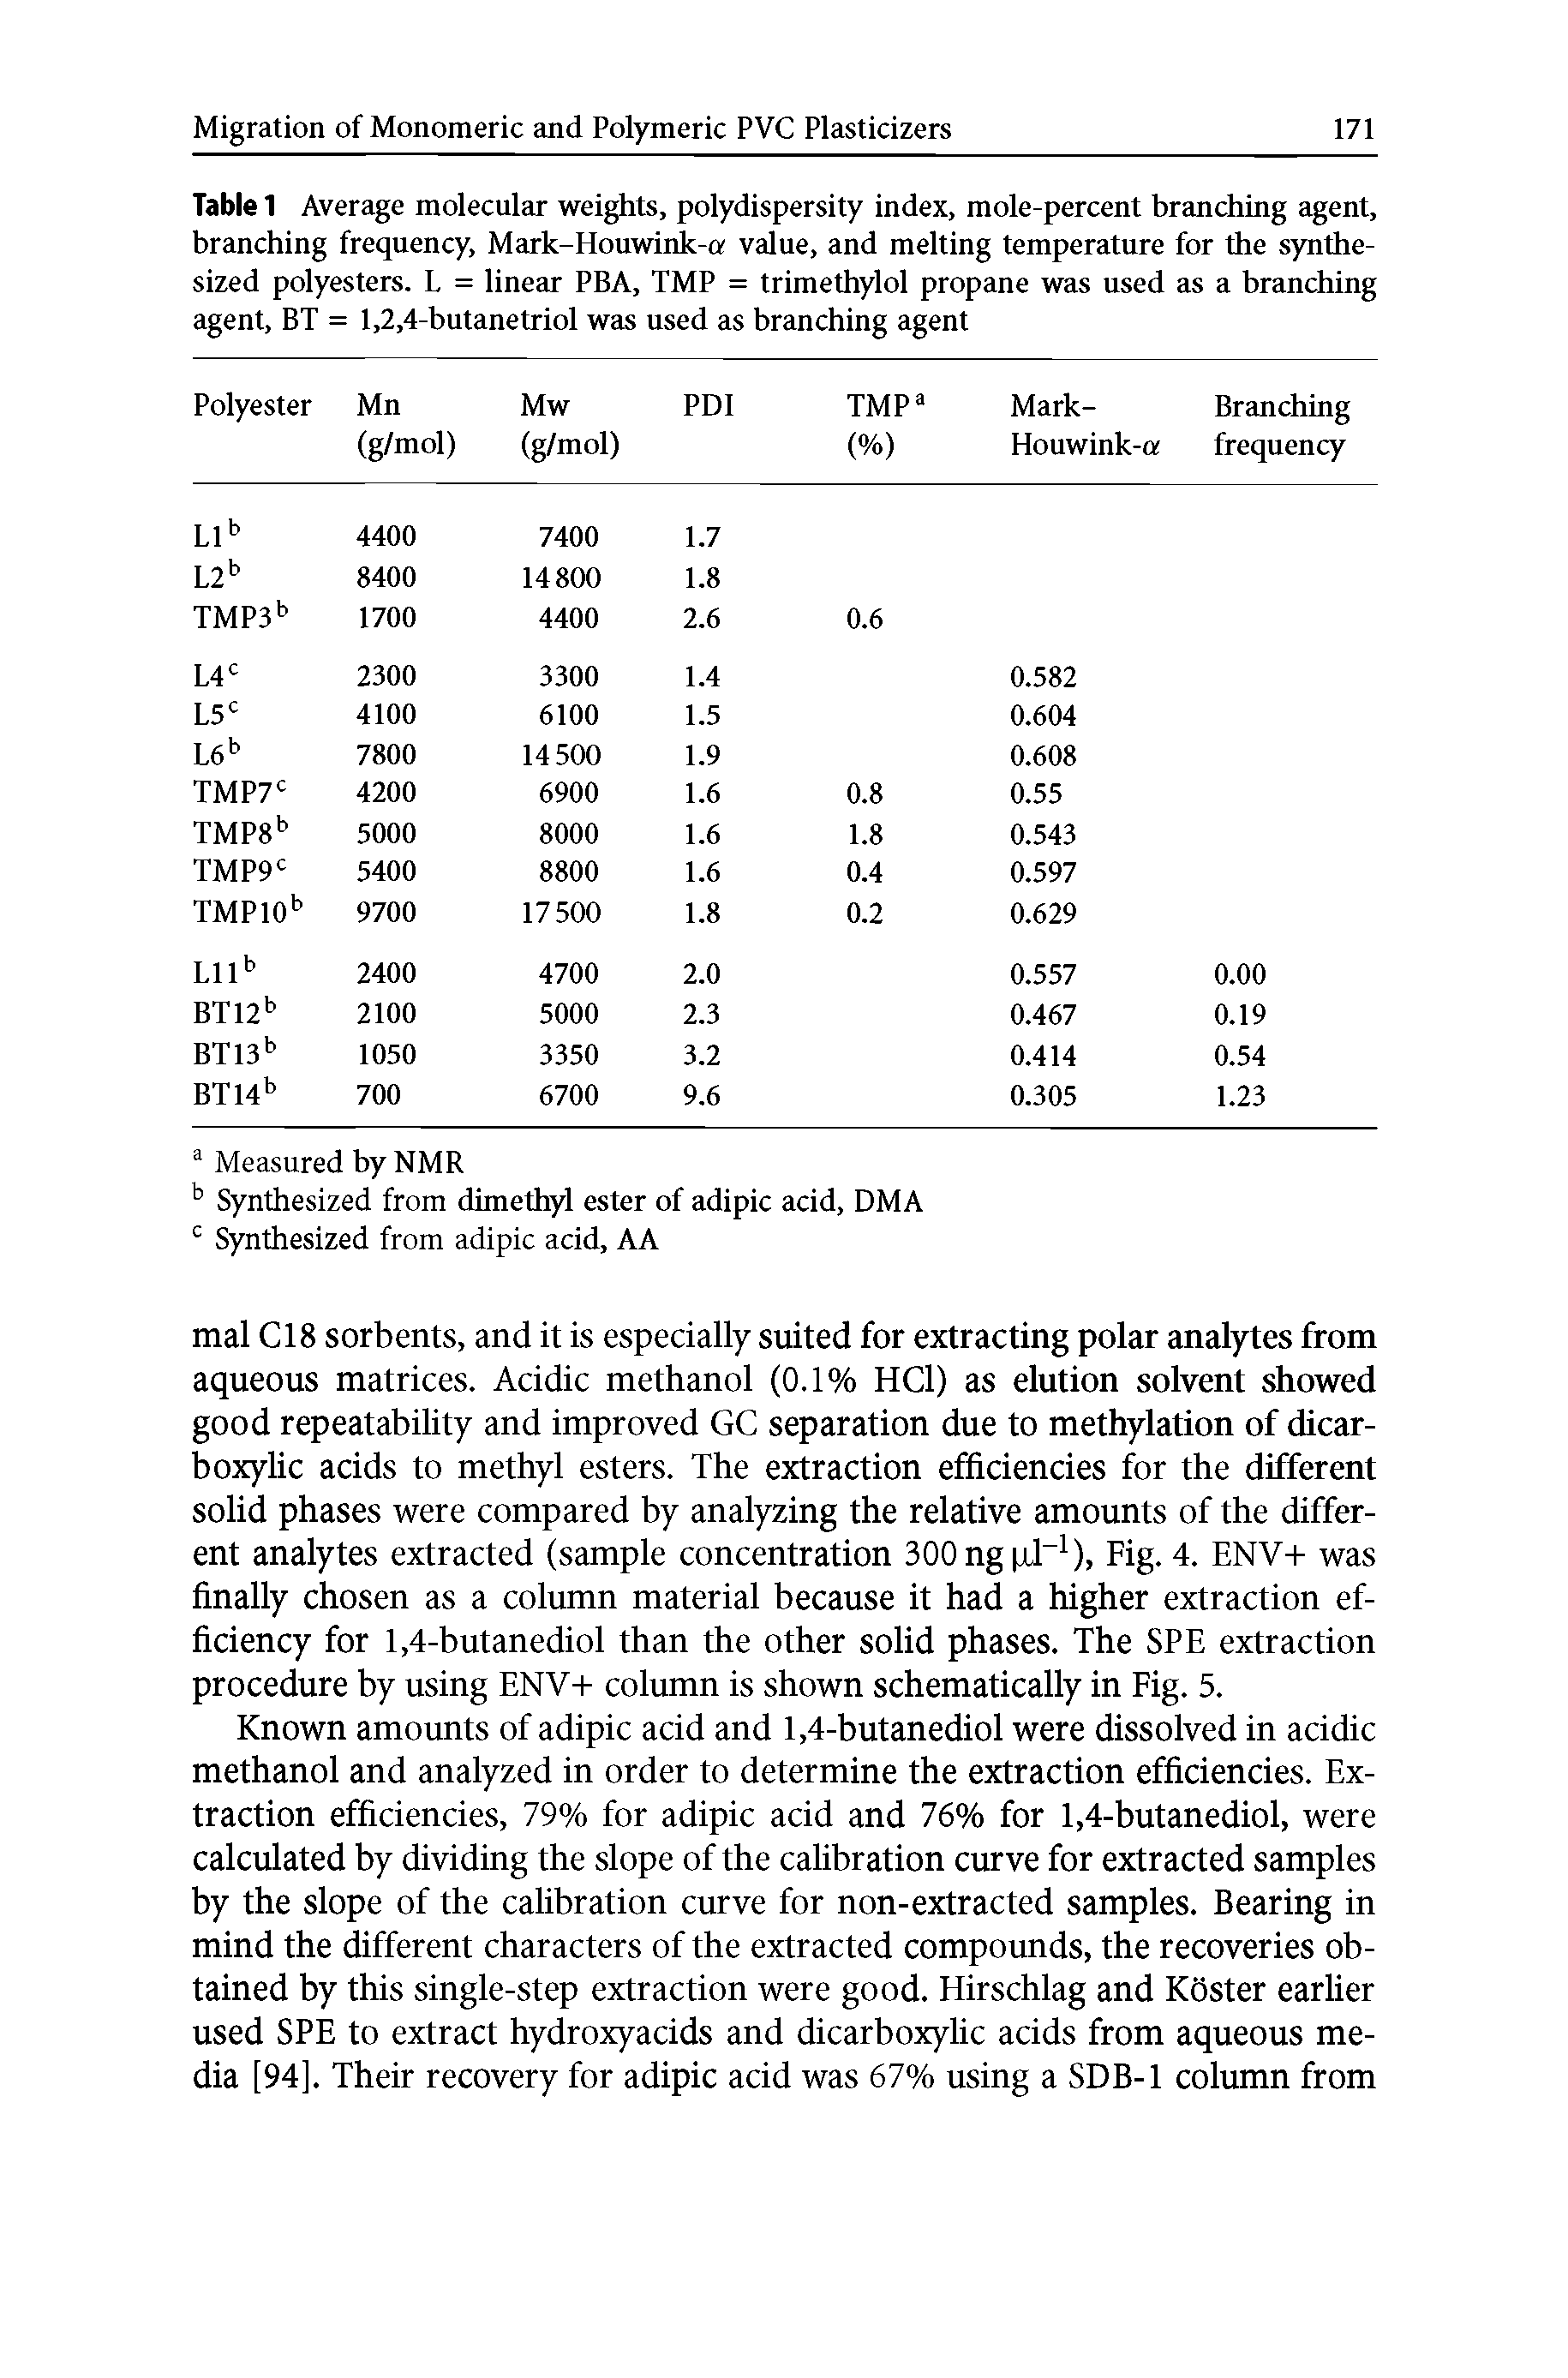 Table 1 Average molecular weights, polydispersity index, mole-percent branching agent, branching frequency, Mark-Houwink-a value, and melting temperature for the synthesized polyesters. L = linear PBA, TMP = trimethylol propane was used as a branching agent, BT = 1,2,4-butanetriol was used as branching agent ...